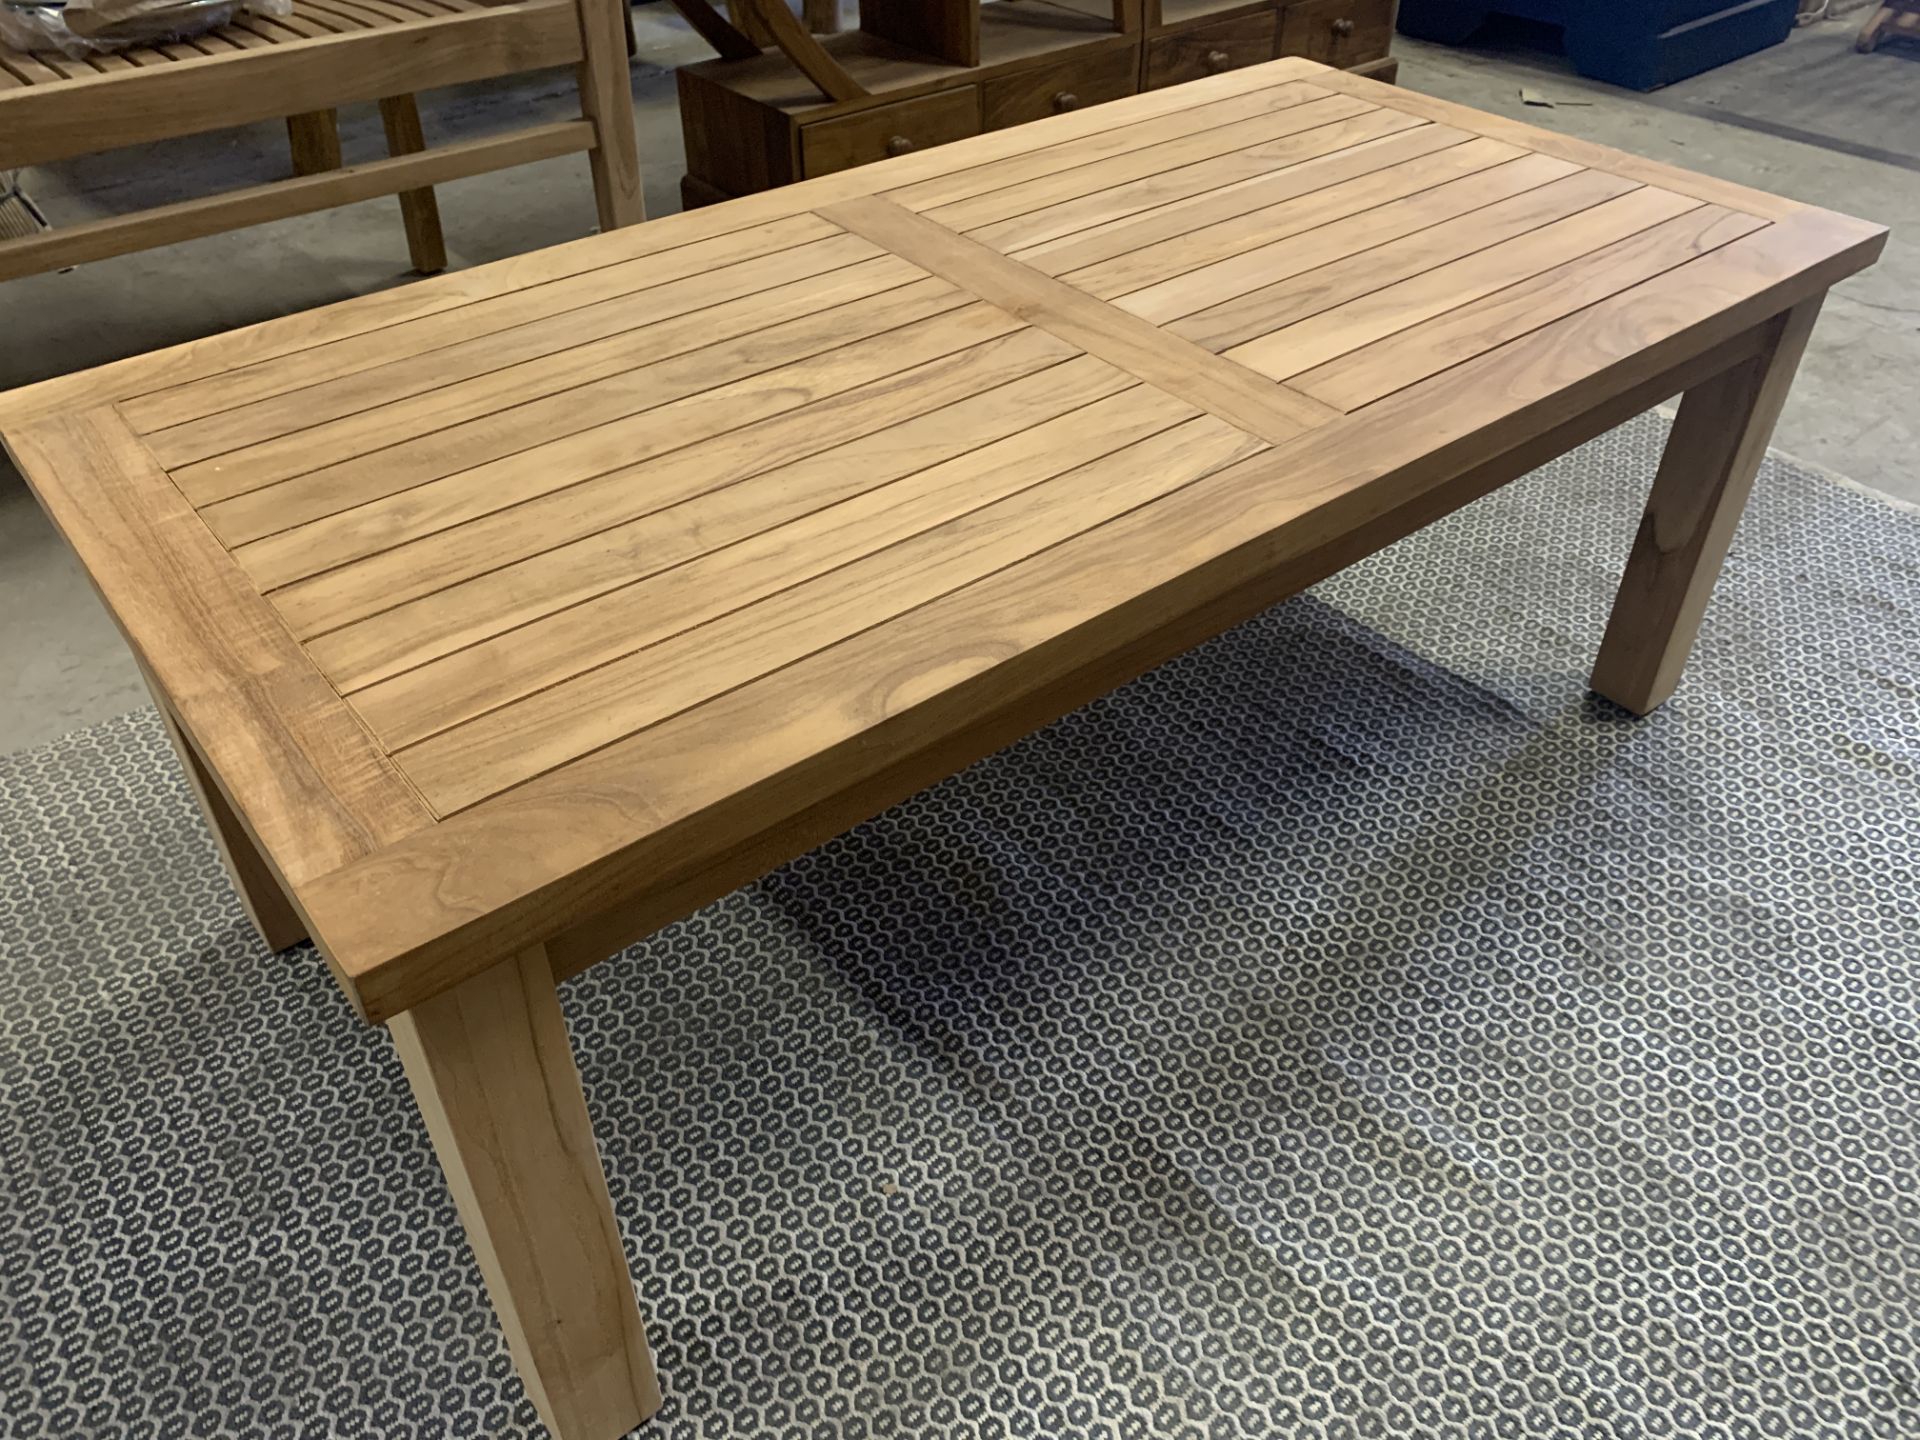 SOLID WOODEN TEAK RECTA COFFEE TABLE L120 X W60 X H45 RRP £295 - Image 2 of 2